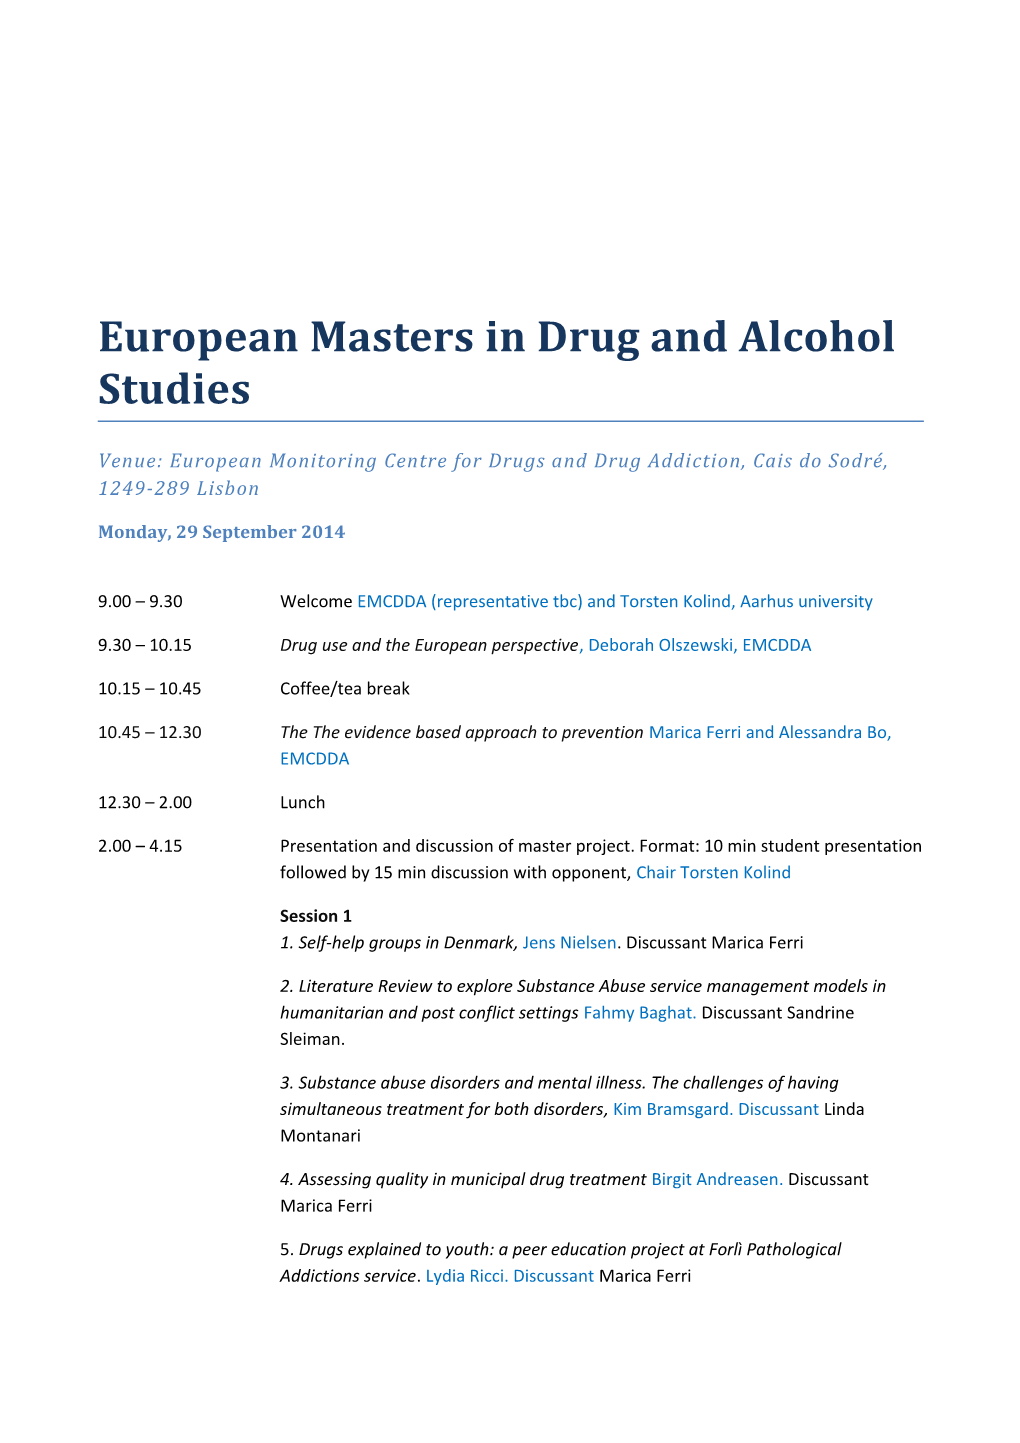 European Masters in Drug and Alcohol Studies